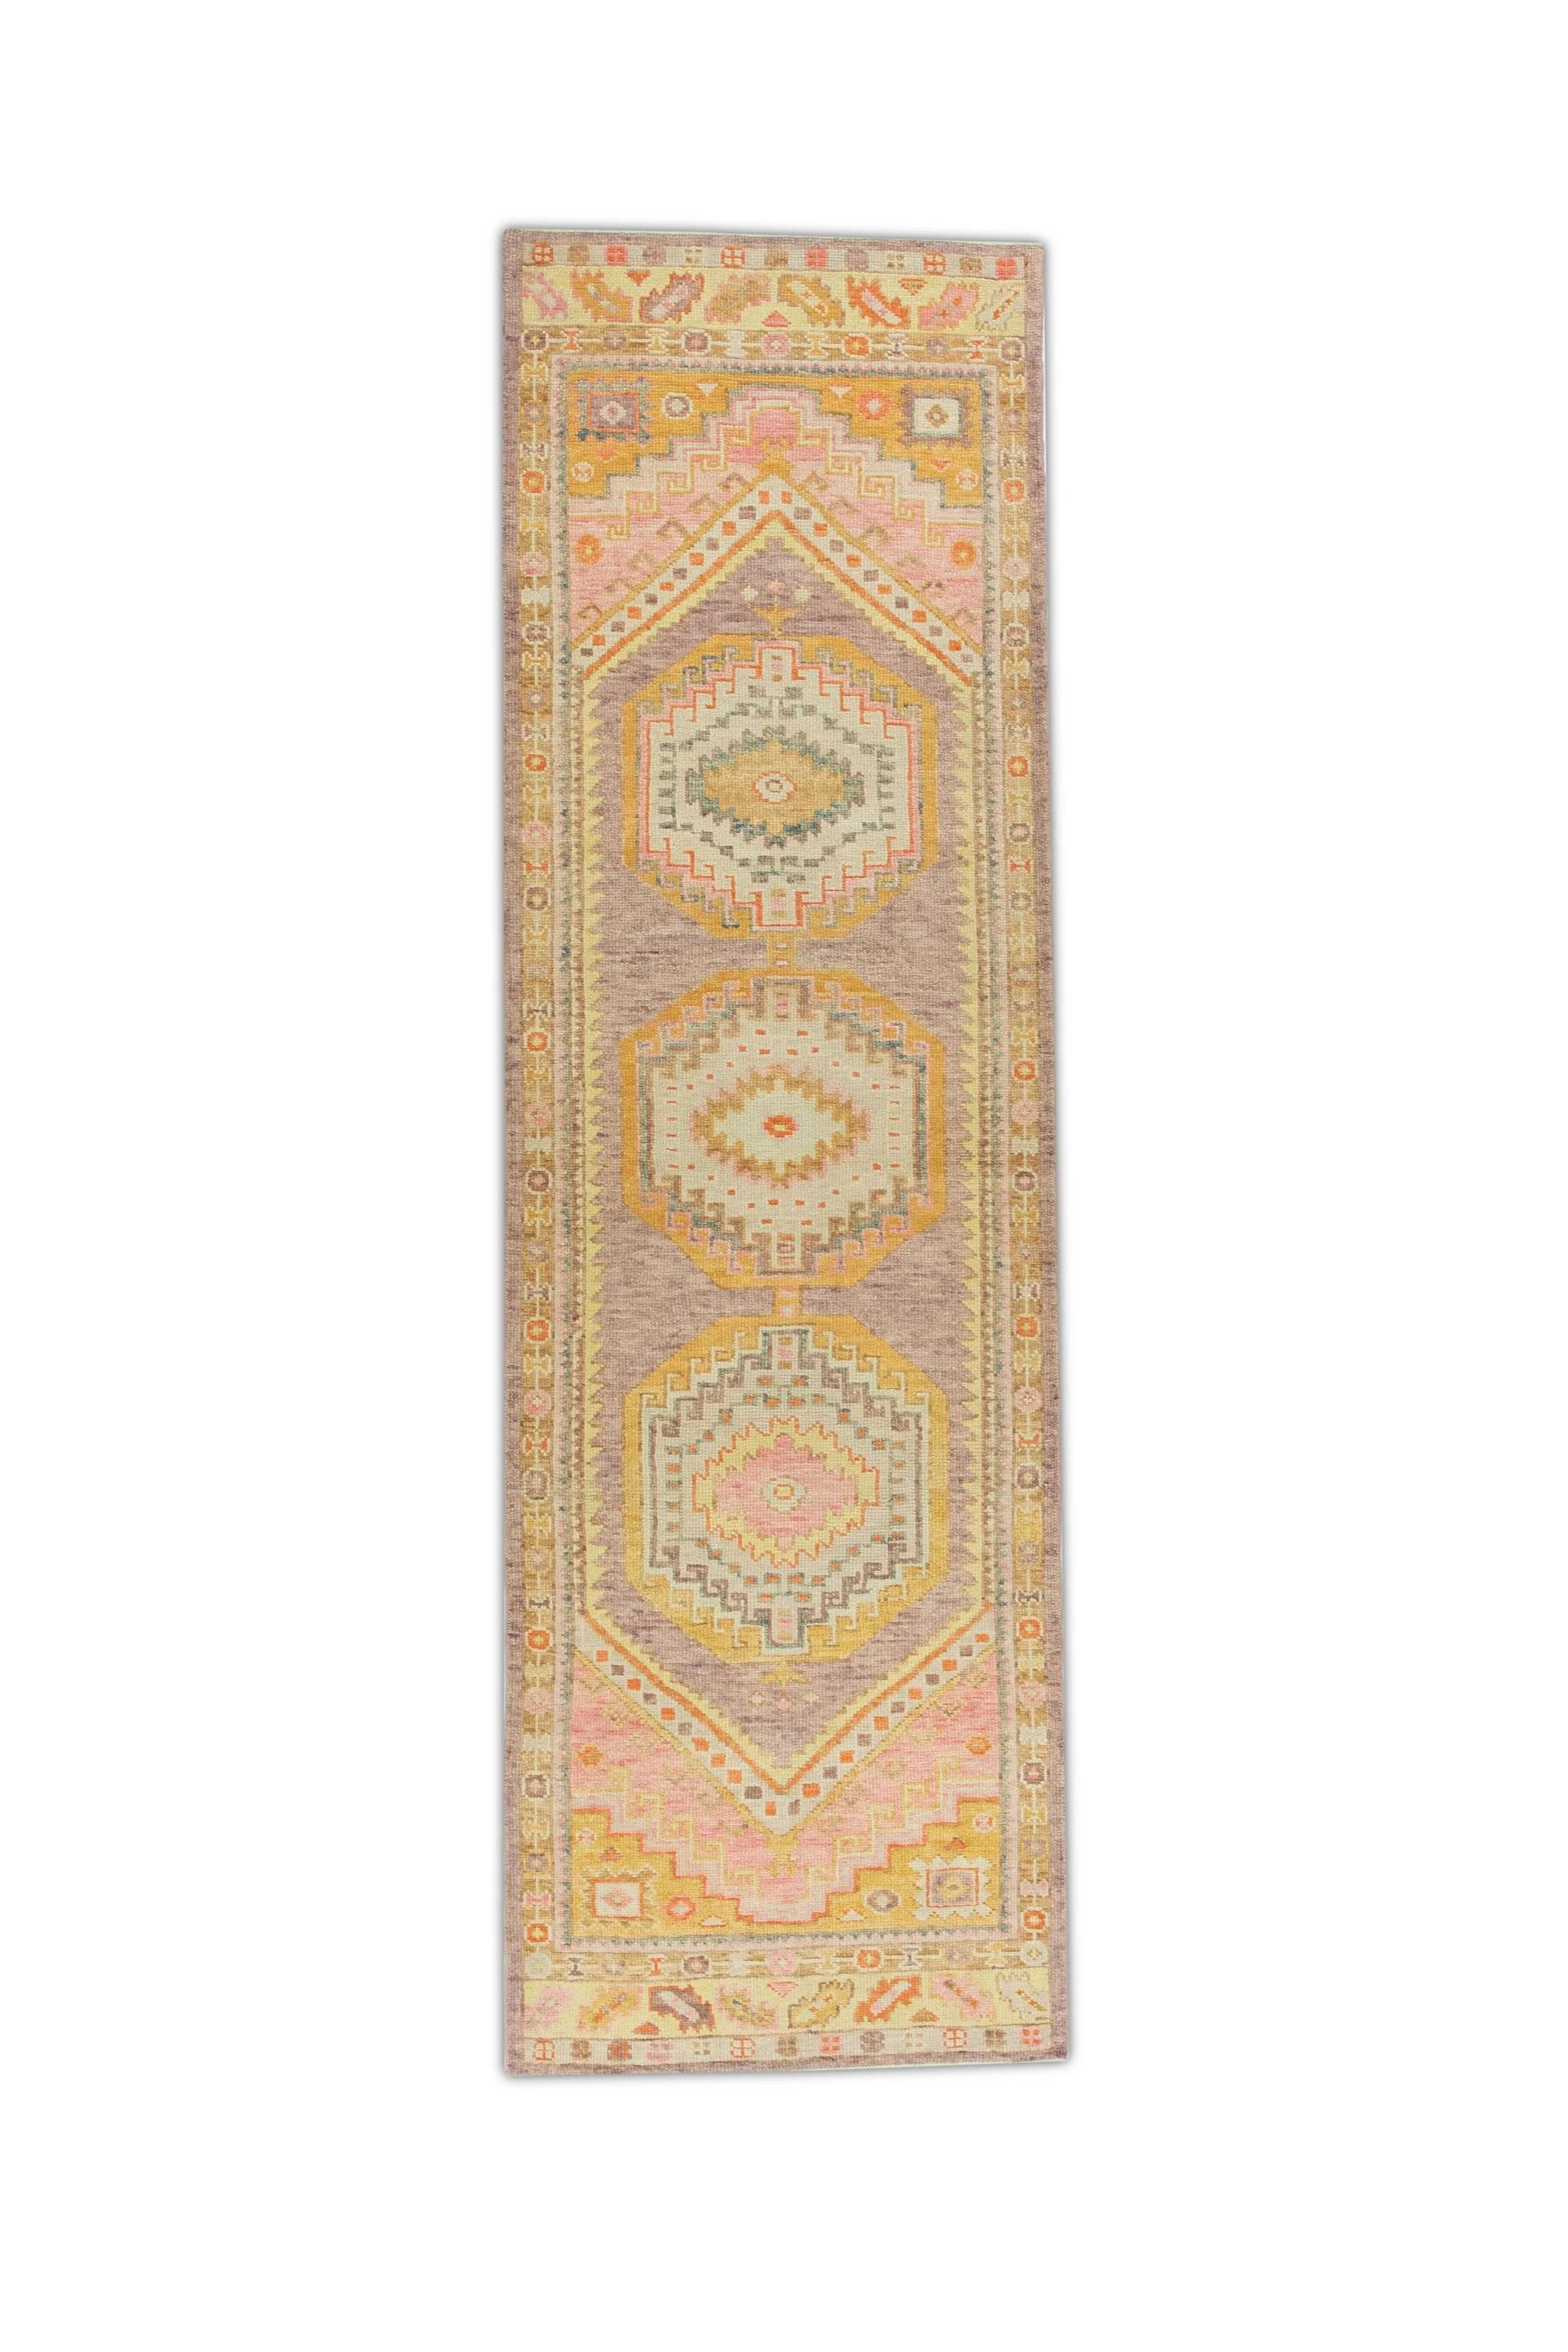 Contemporary Multicolor Handwoven Wool Turkish Oushak Runner 3' x 10'2